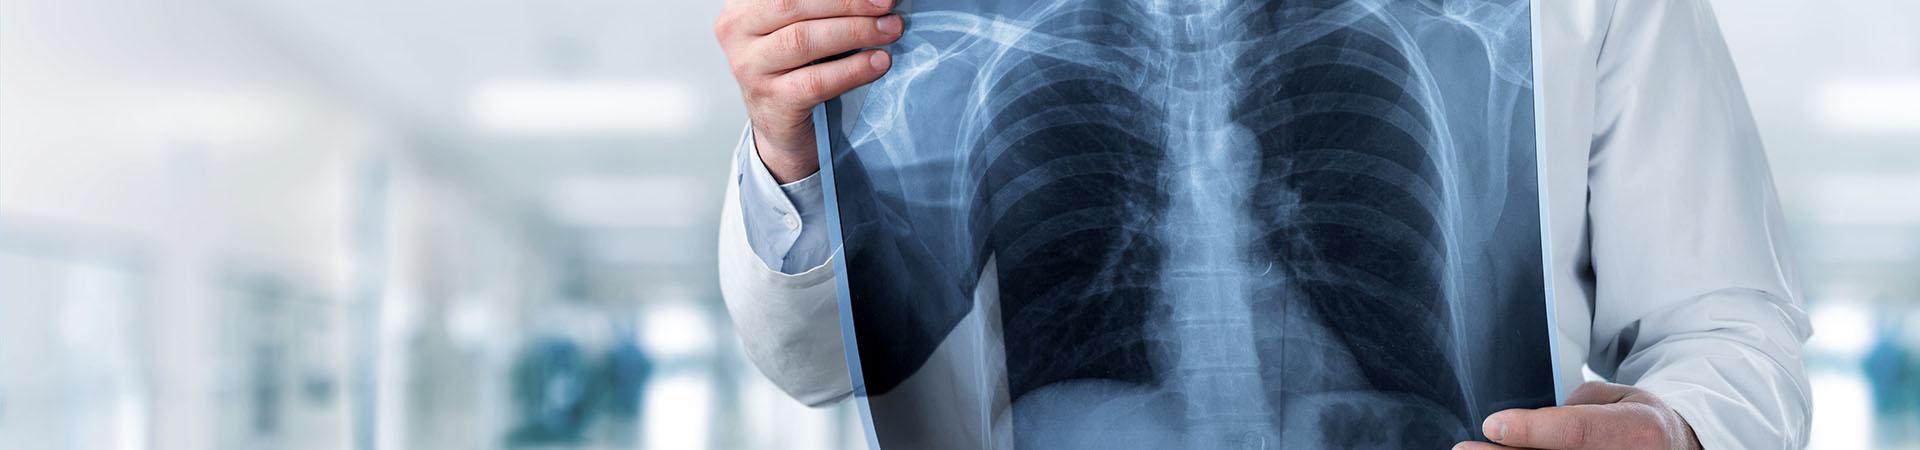 Image of a doctor holding a chest x-ray in a hospital corridor